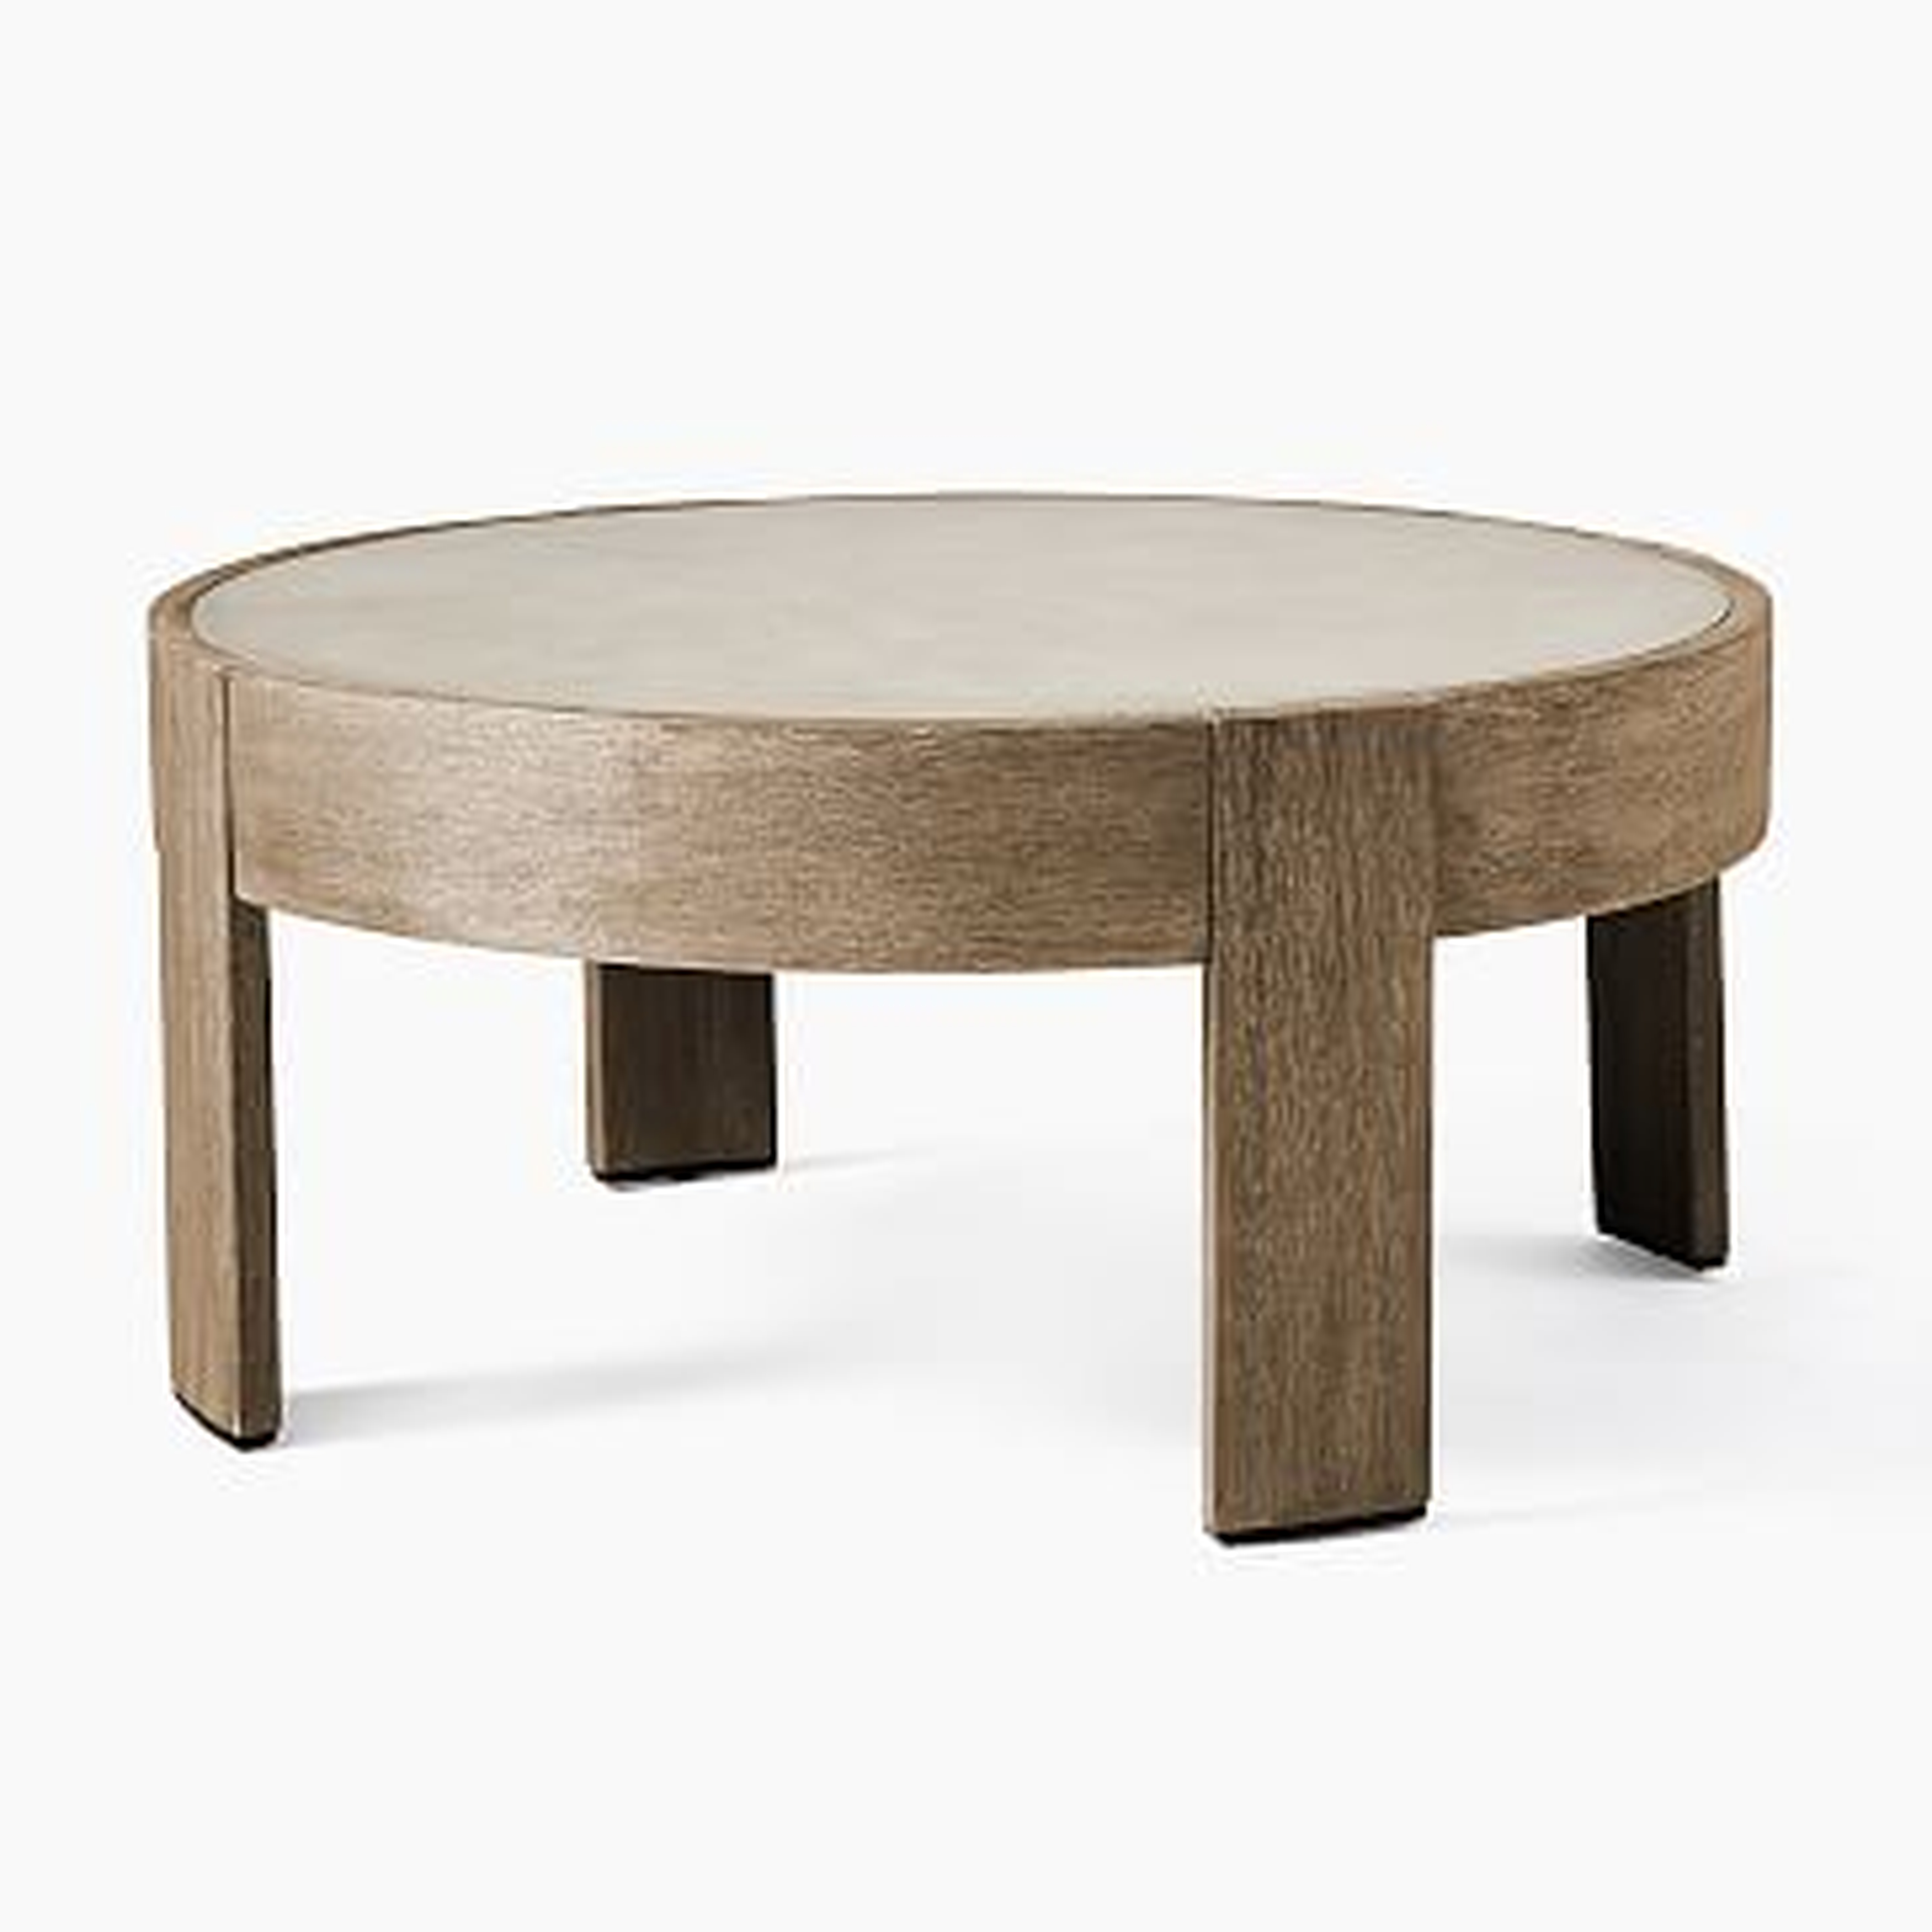 Portside Round Coffee Table, Concrete, Driftwood - West Elm